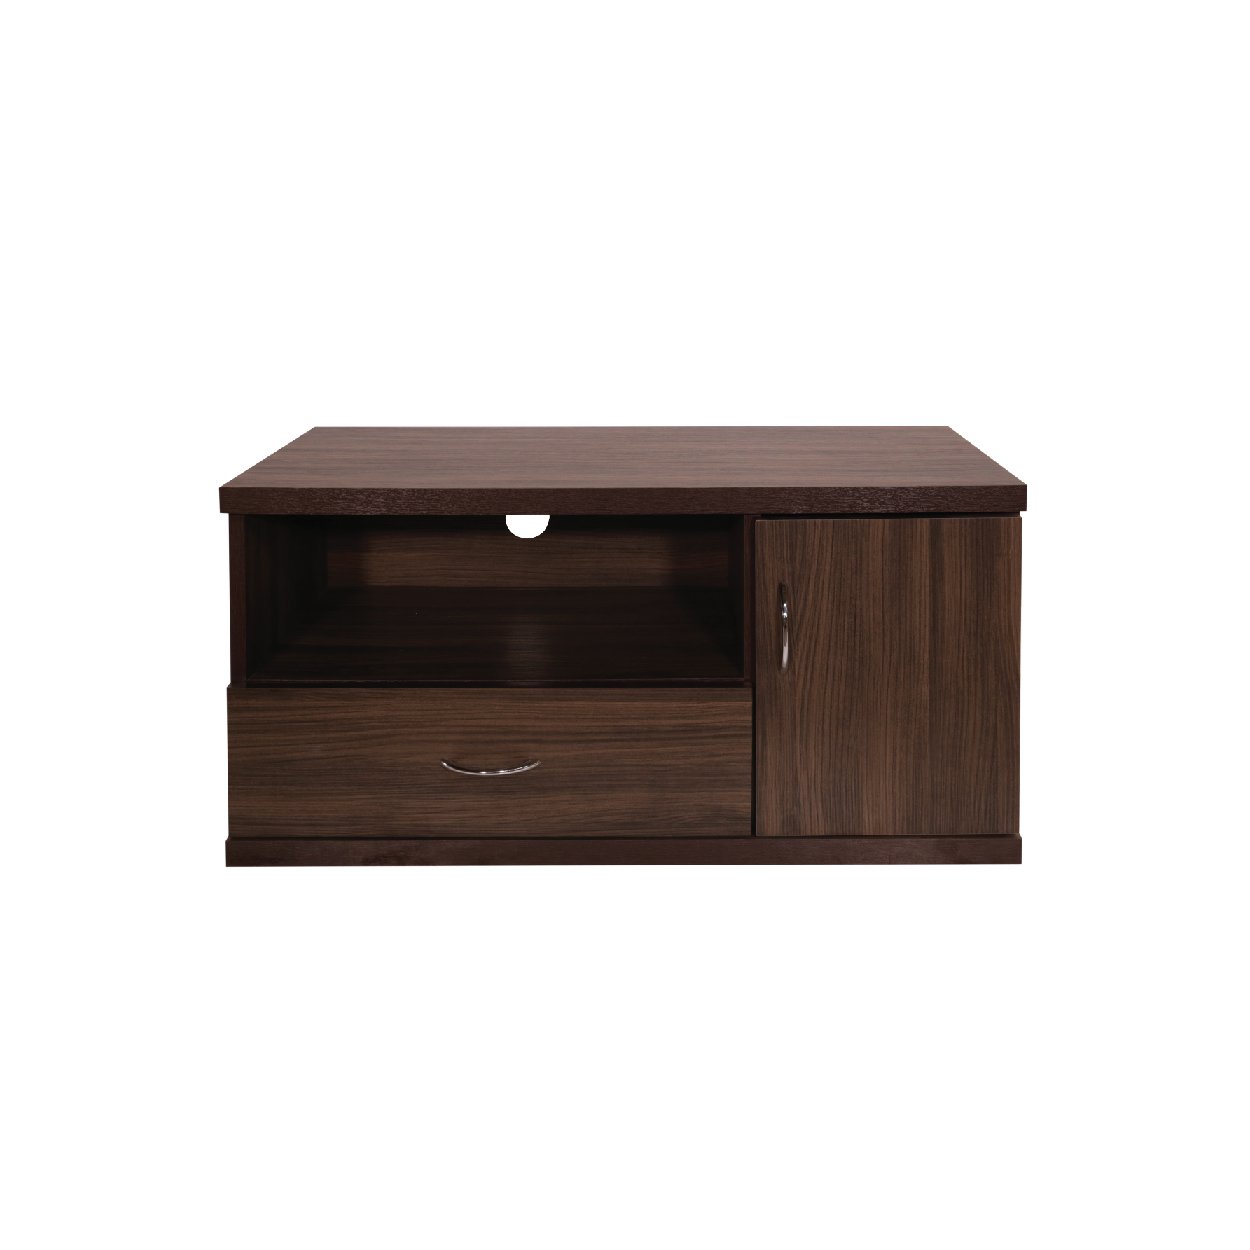 OAKES TV STAND SLIM